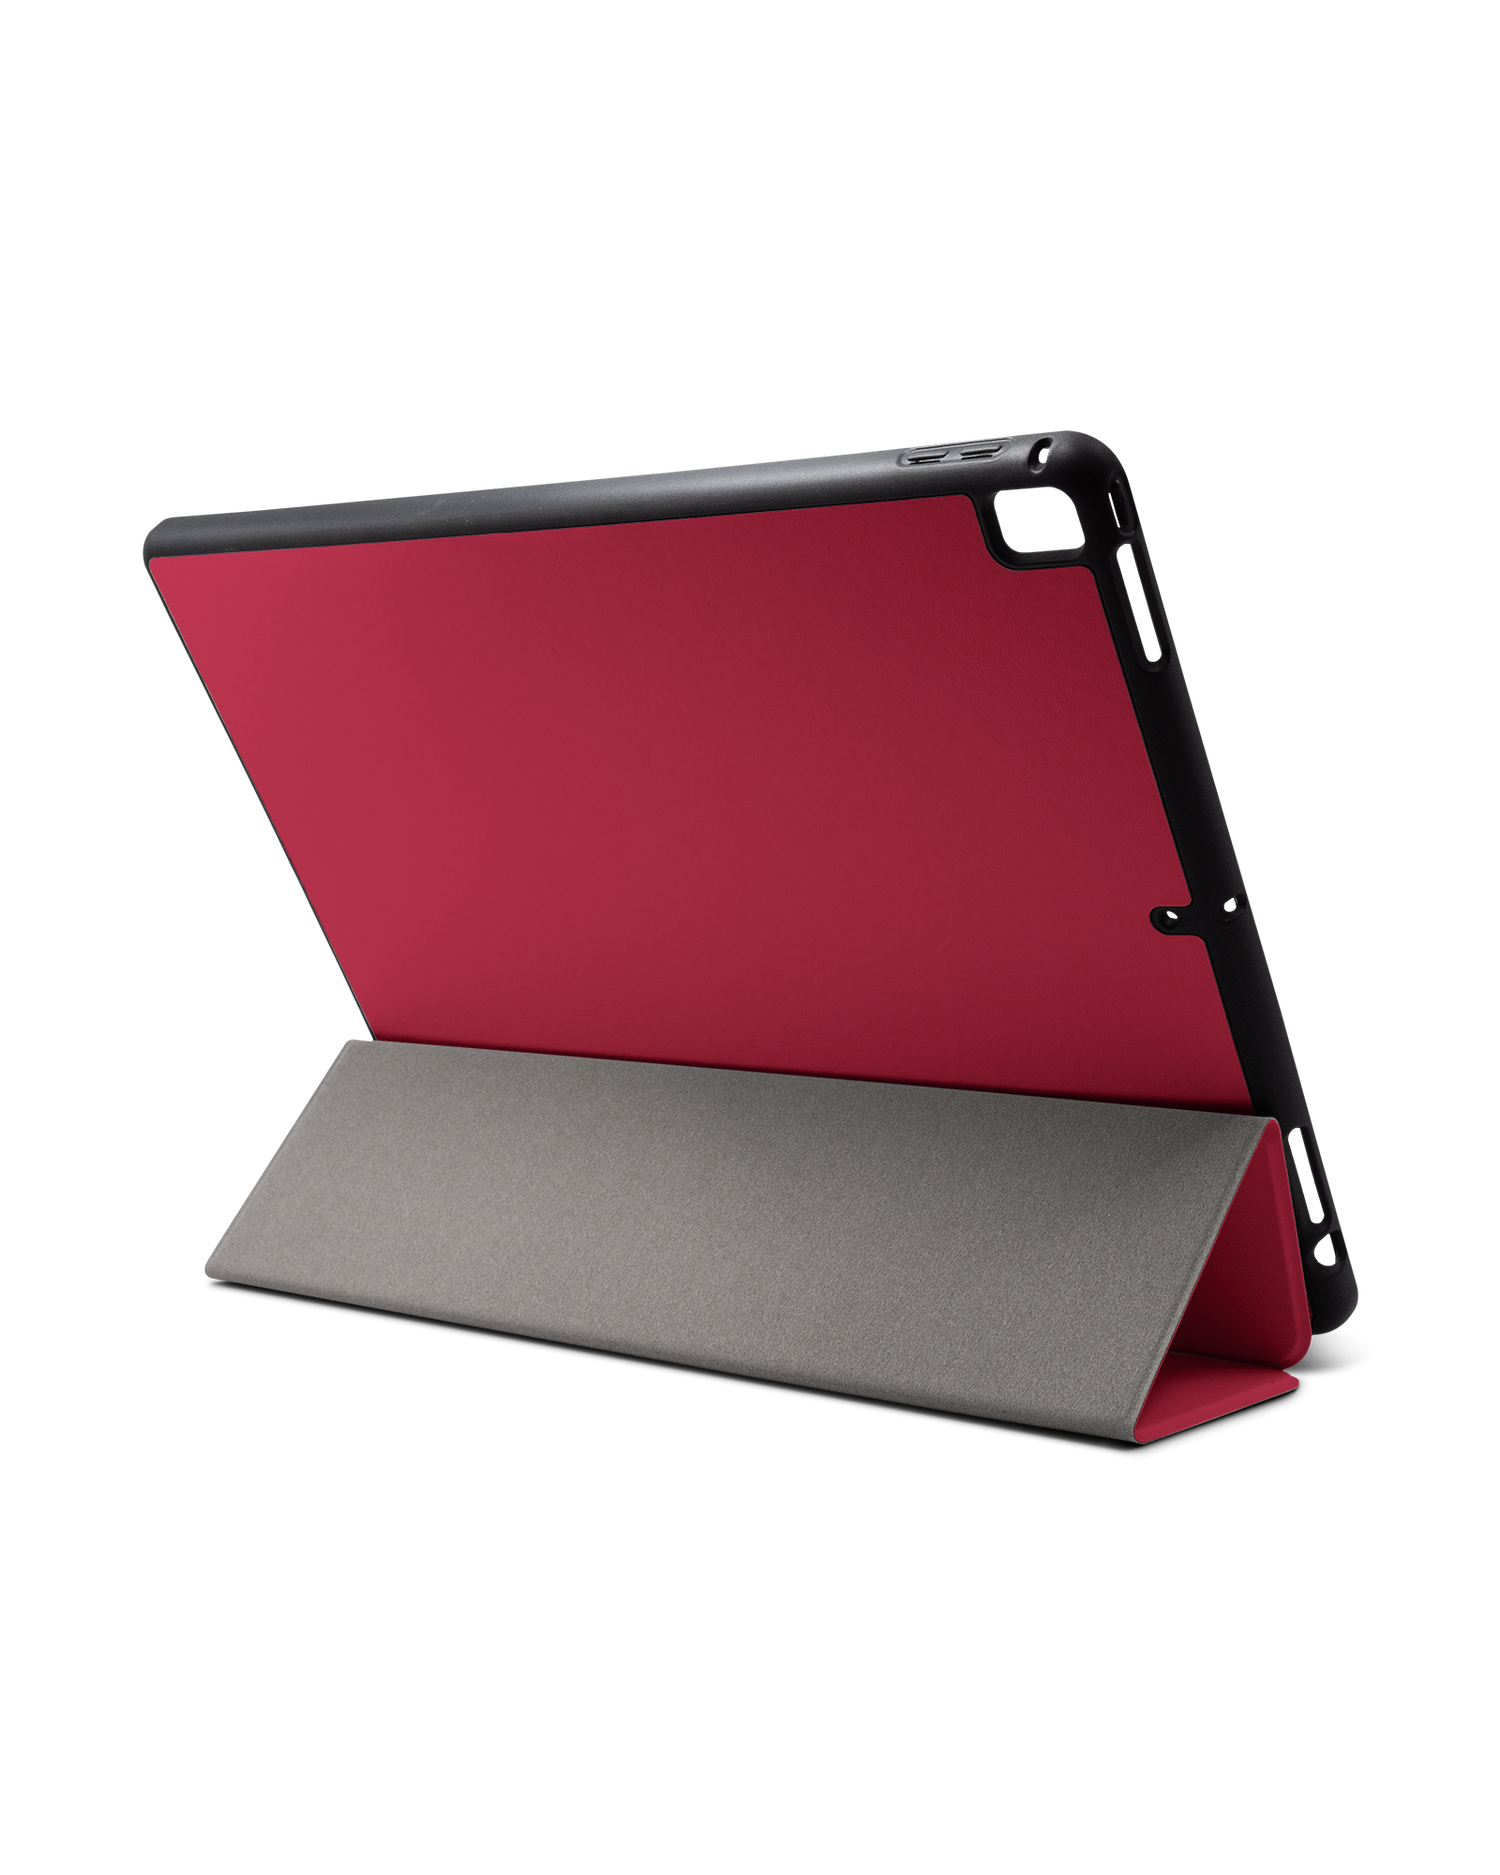 RED iPad Case with Pencil Holder for Apple iPad Pro 2 12.9